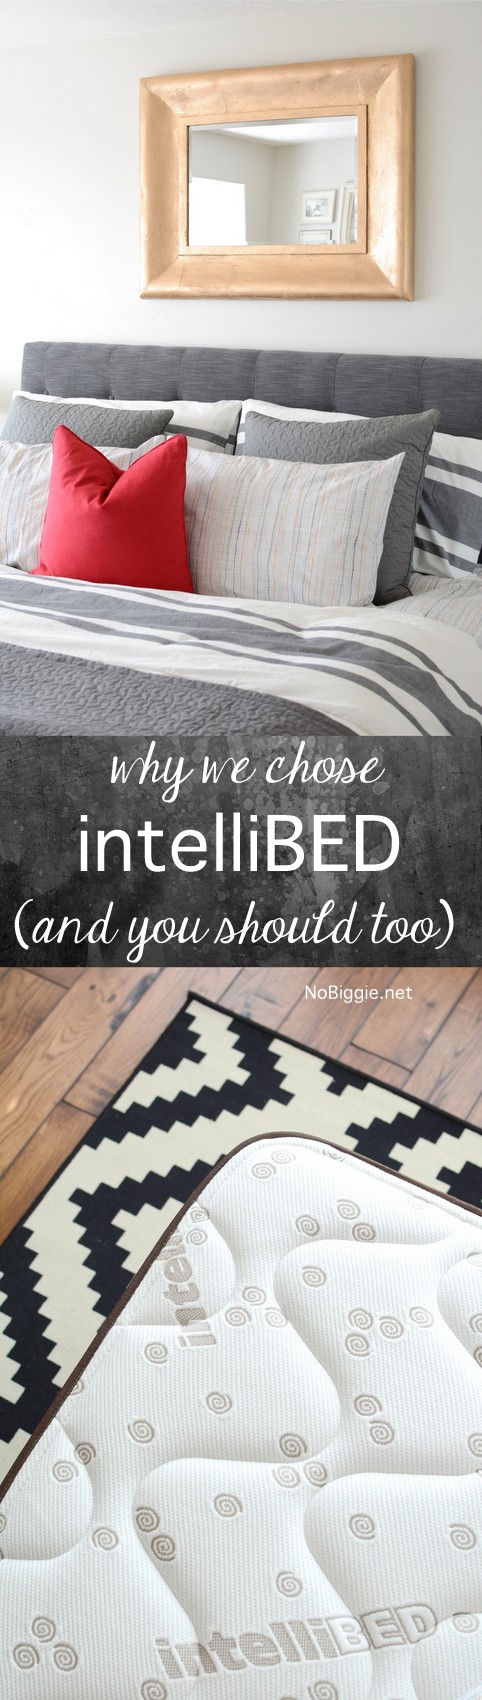 why we chose intelliBED and you should too | NoBiggie.net